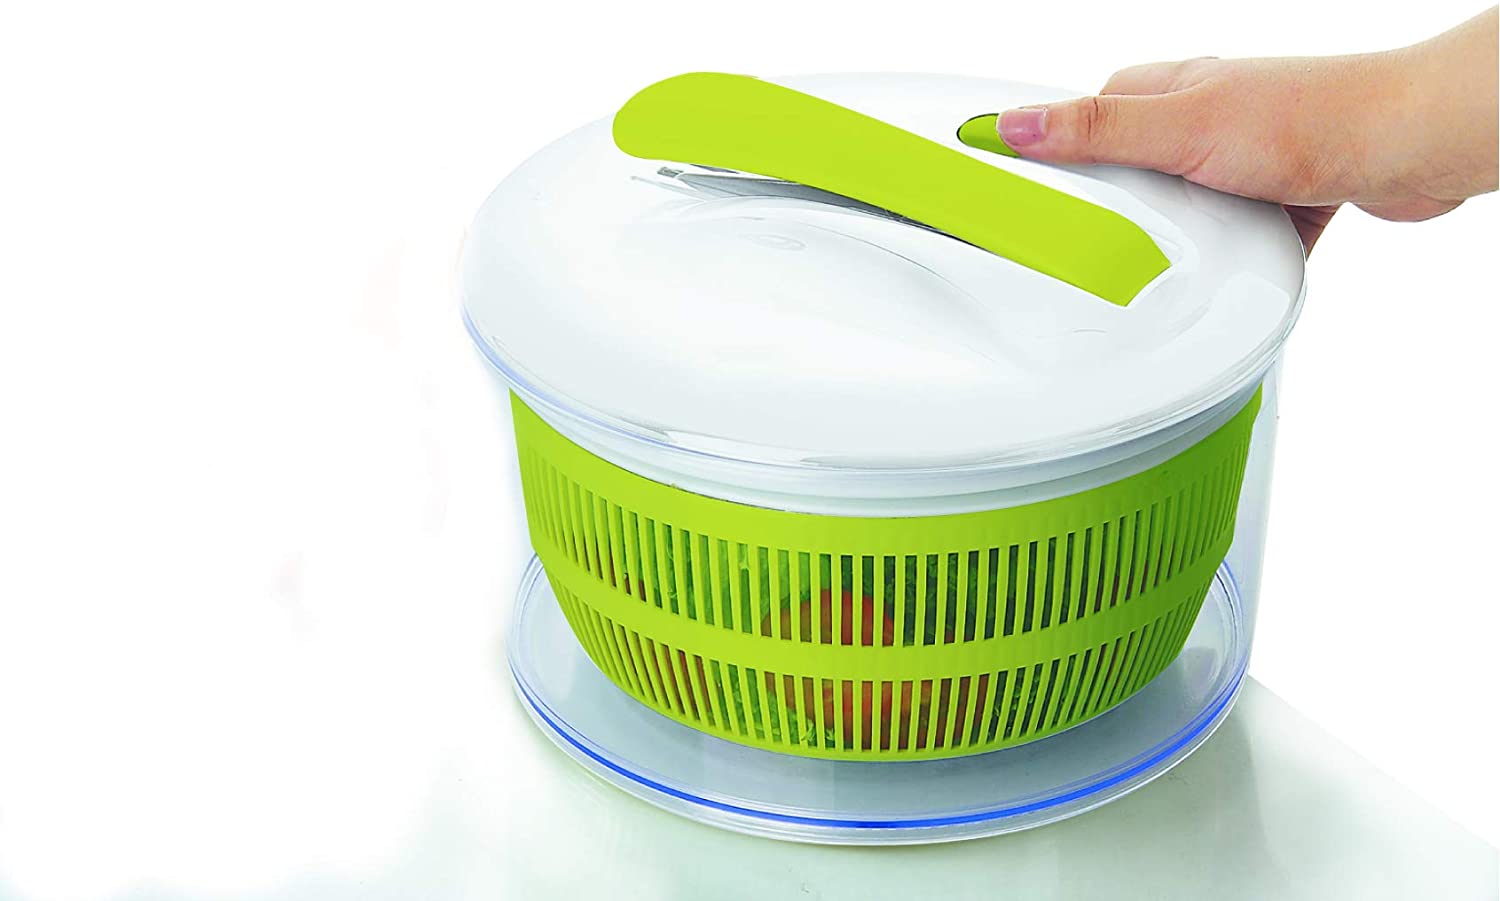 https://kateishop.com/cdn/shop/products/product-783016-ibili-small-salad-spinner-salad-dryer-2-637467278175986922_29776667-ee10-4a70-927e-4a1d97fd4875_1024x1024@2x.jpg?v=1633791705